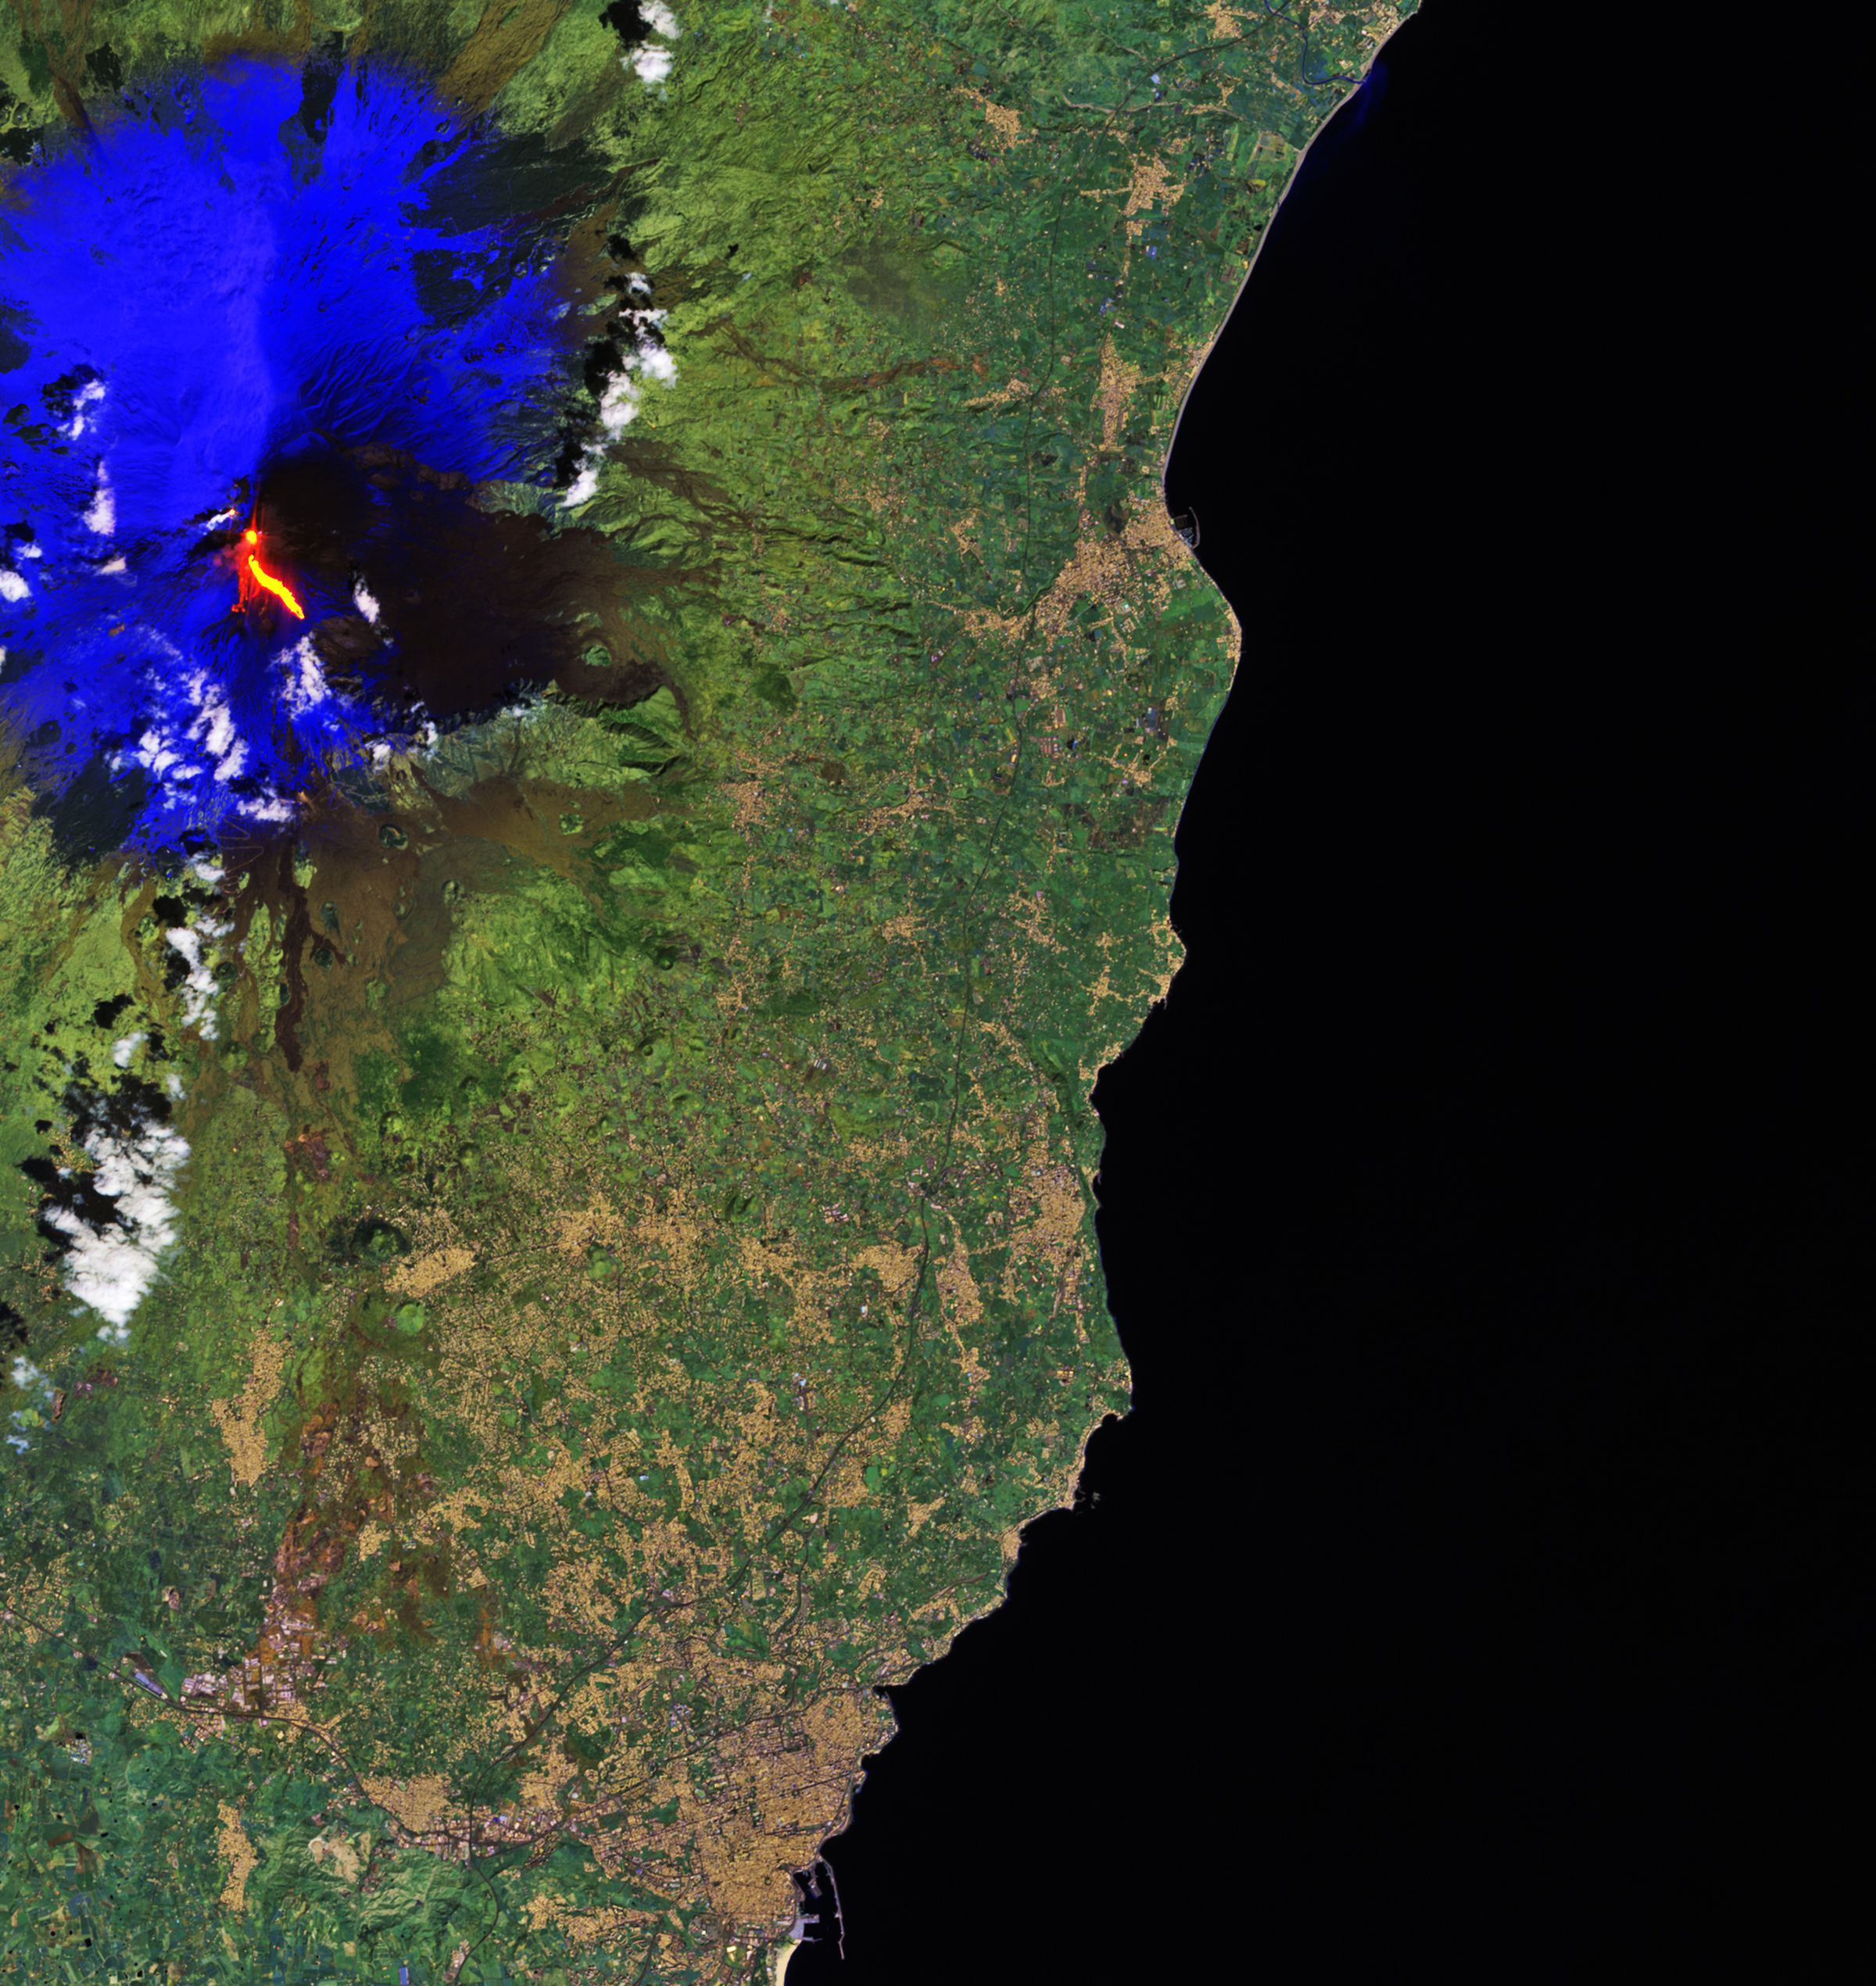 An image of erupting Mount Etna taken on March 16th by the European Space Agency. The surrounding snow has been processed in blue to distinguish from the clouds.